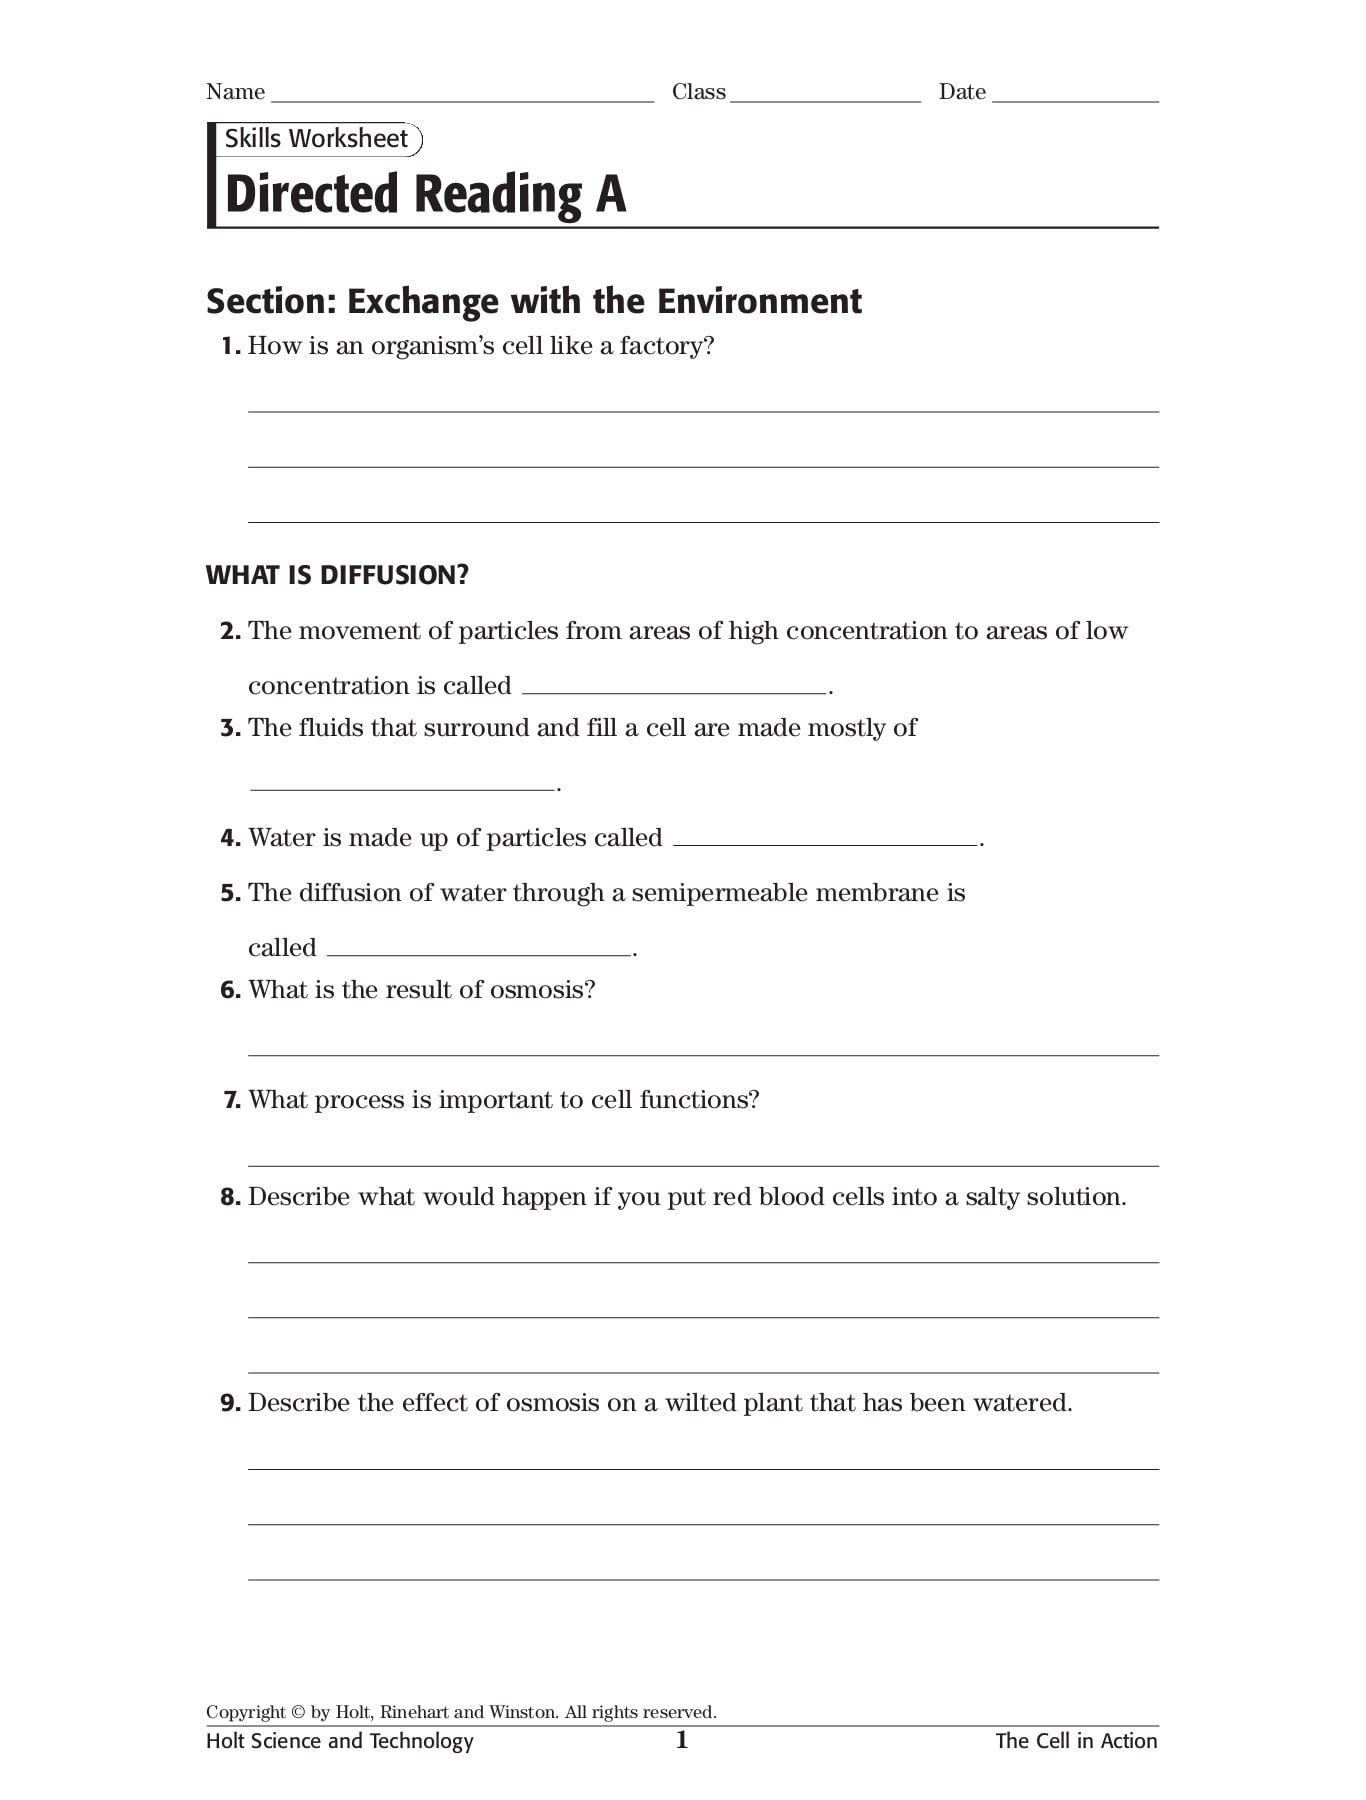 Skills Worksheet Directed Reading A Flip EBook Pages 1 4 AnyFlip